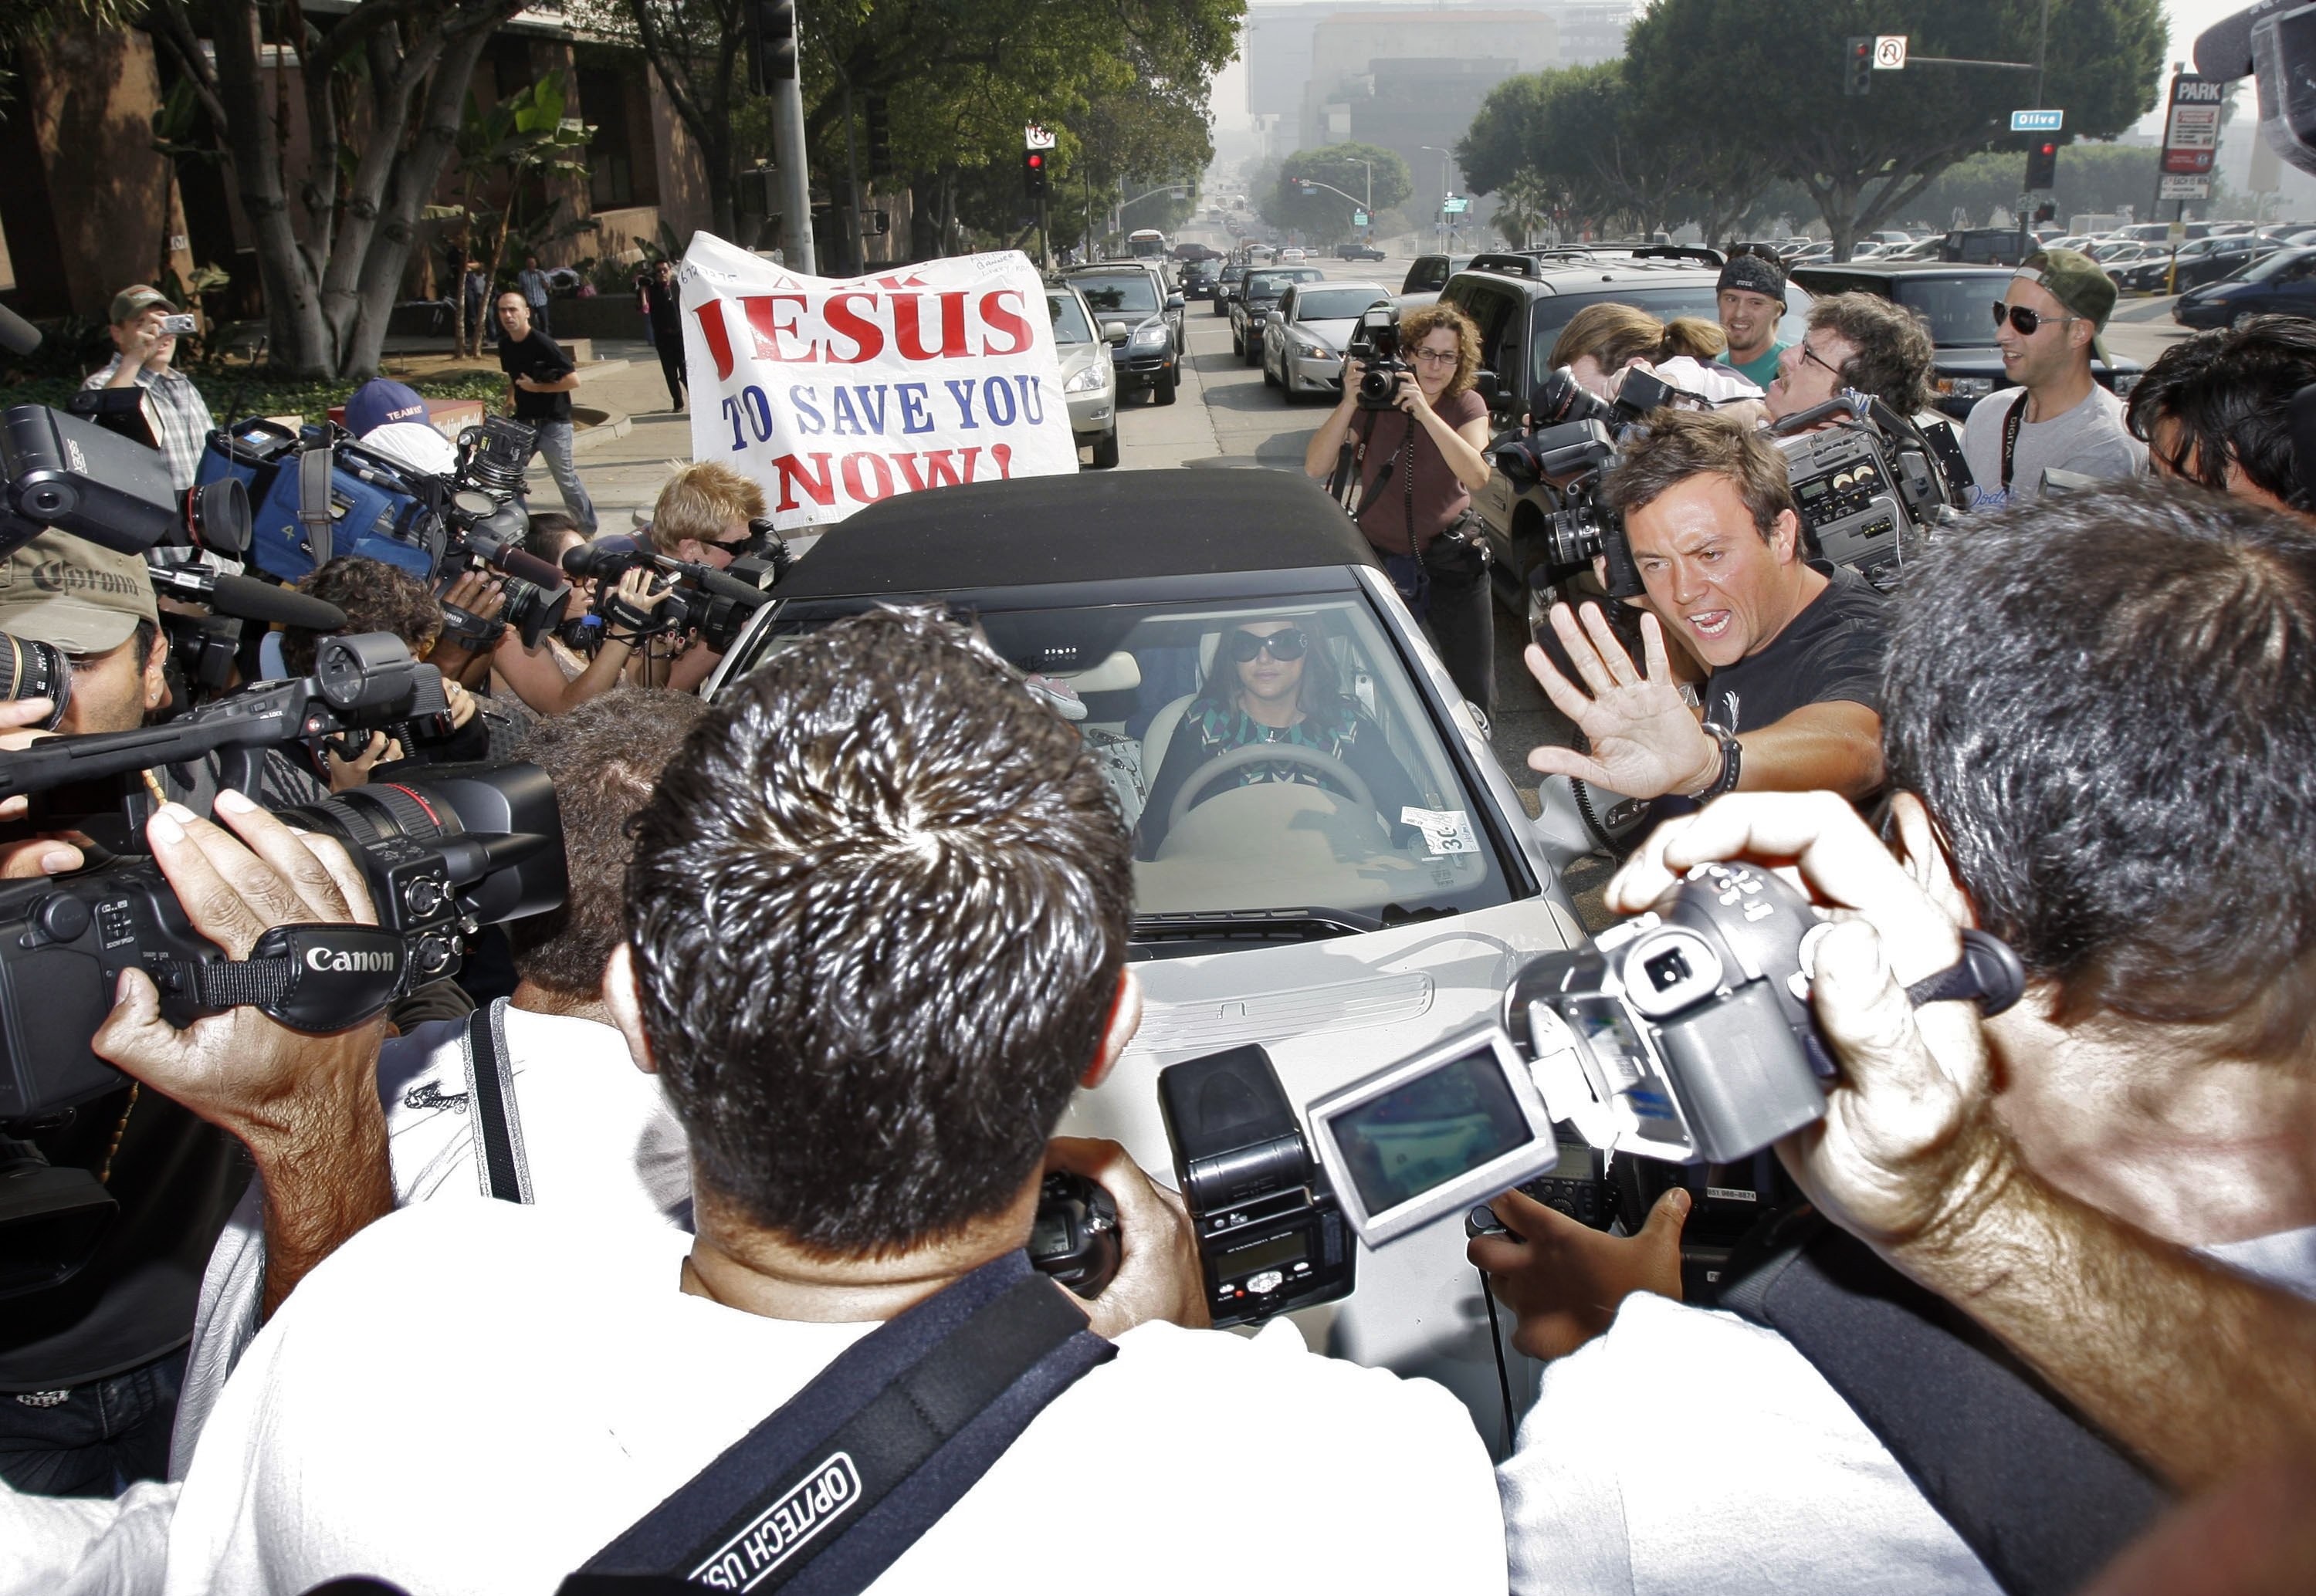 In this file photo, paparazzi surround Britney Spears as she arrives at a court hearing in Los Angeles on Oct. 26, 2007. (AP Photo)